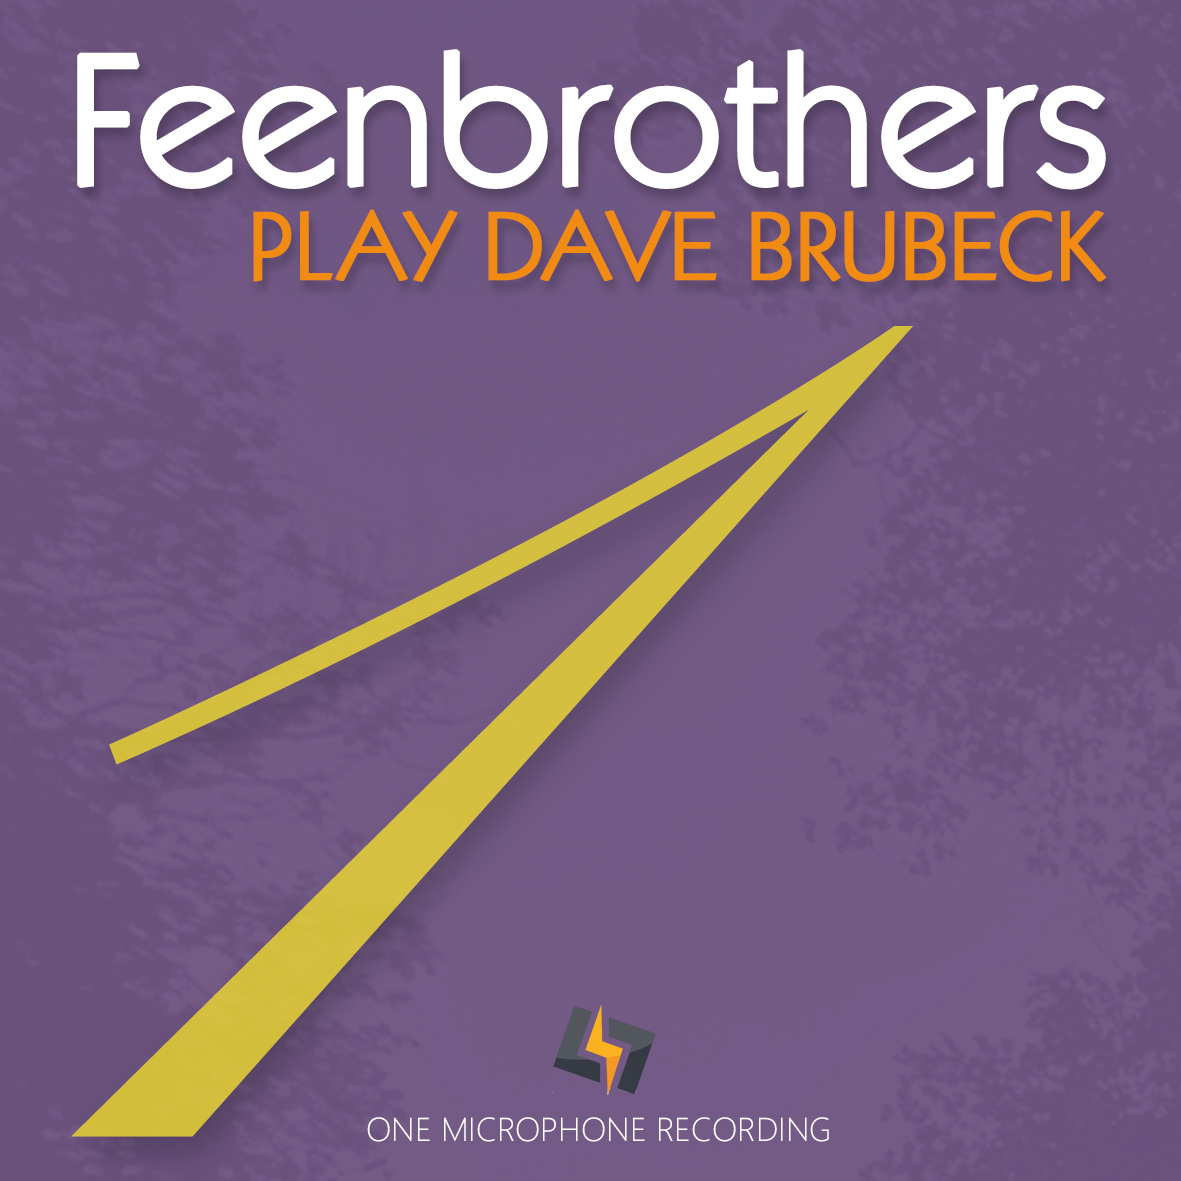 The Feenbrothers - Play Dave Brubeck (2019) [nativeDSDmusic DSF DSD64/2.82MHz + FLAC 24bit/96kHz]